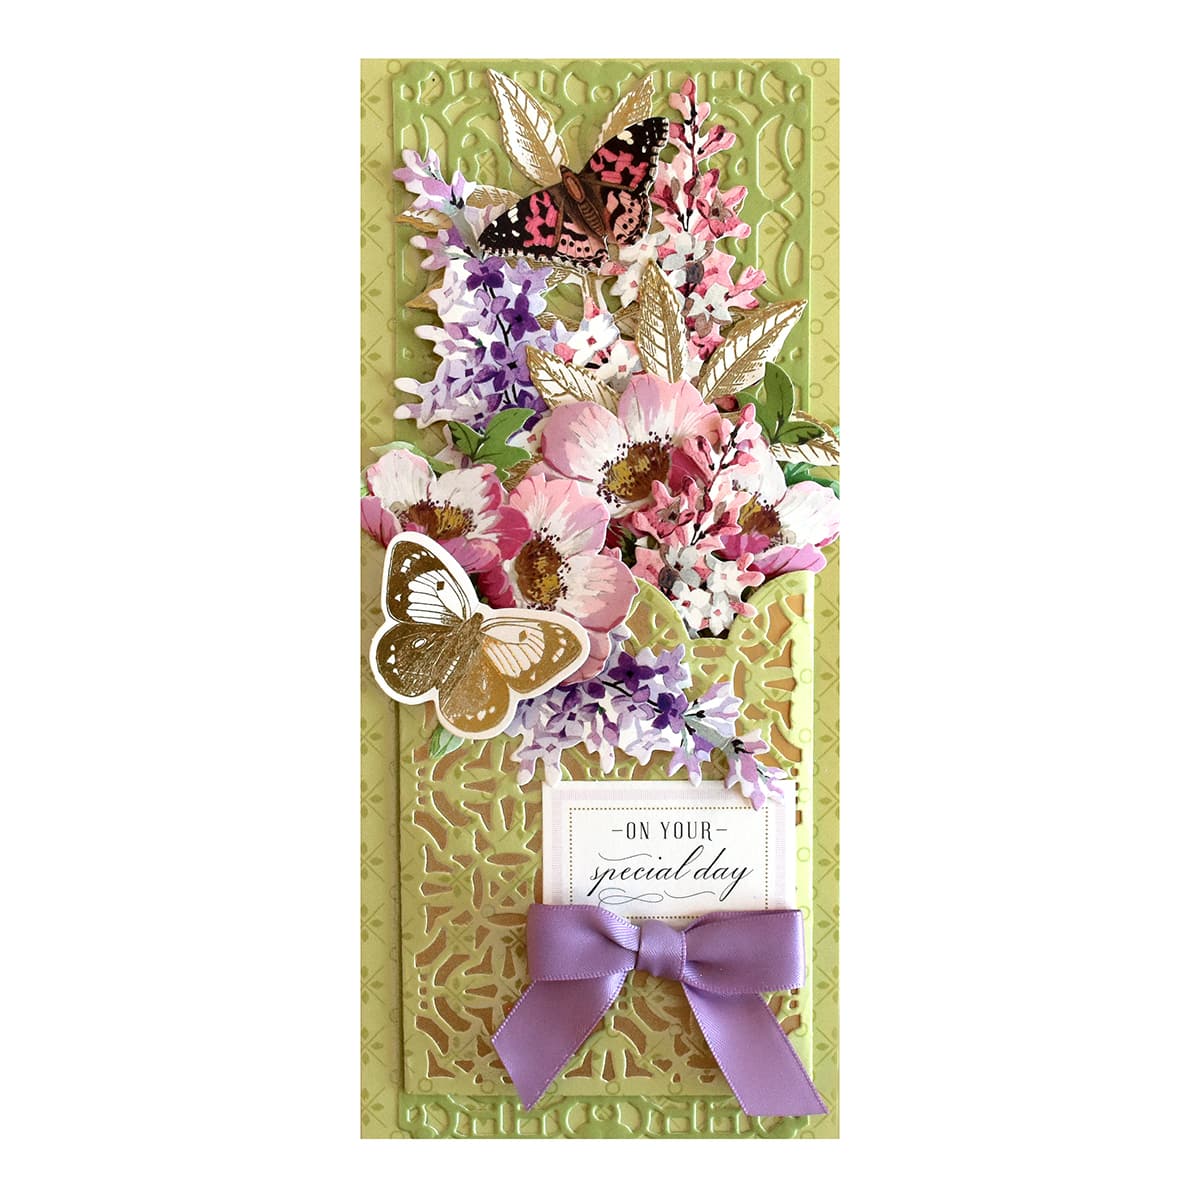 a card with flowers and a butterfly on it.